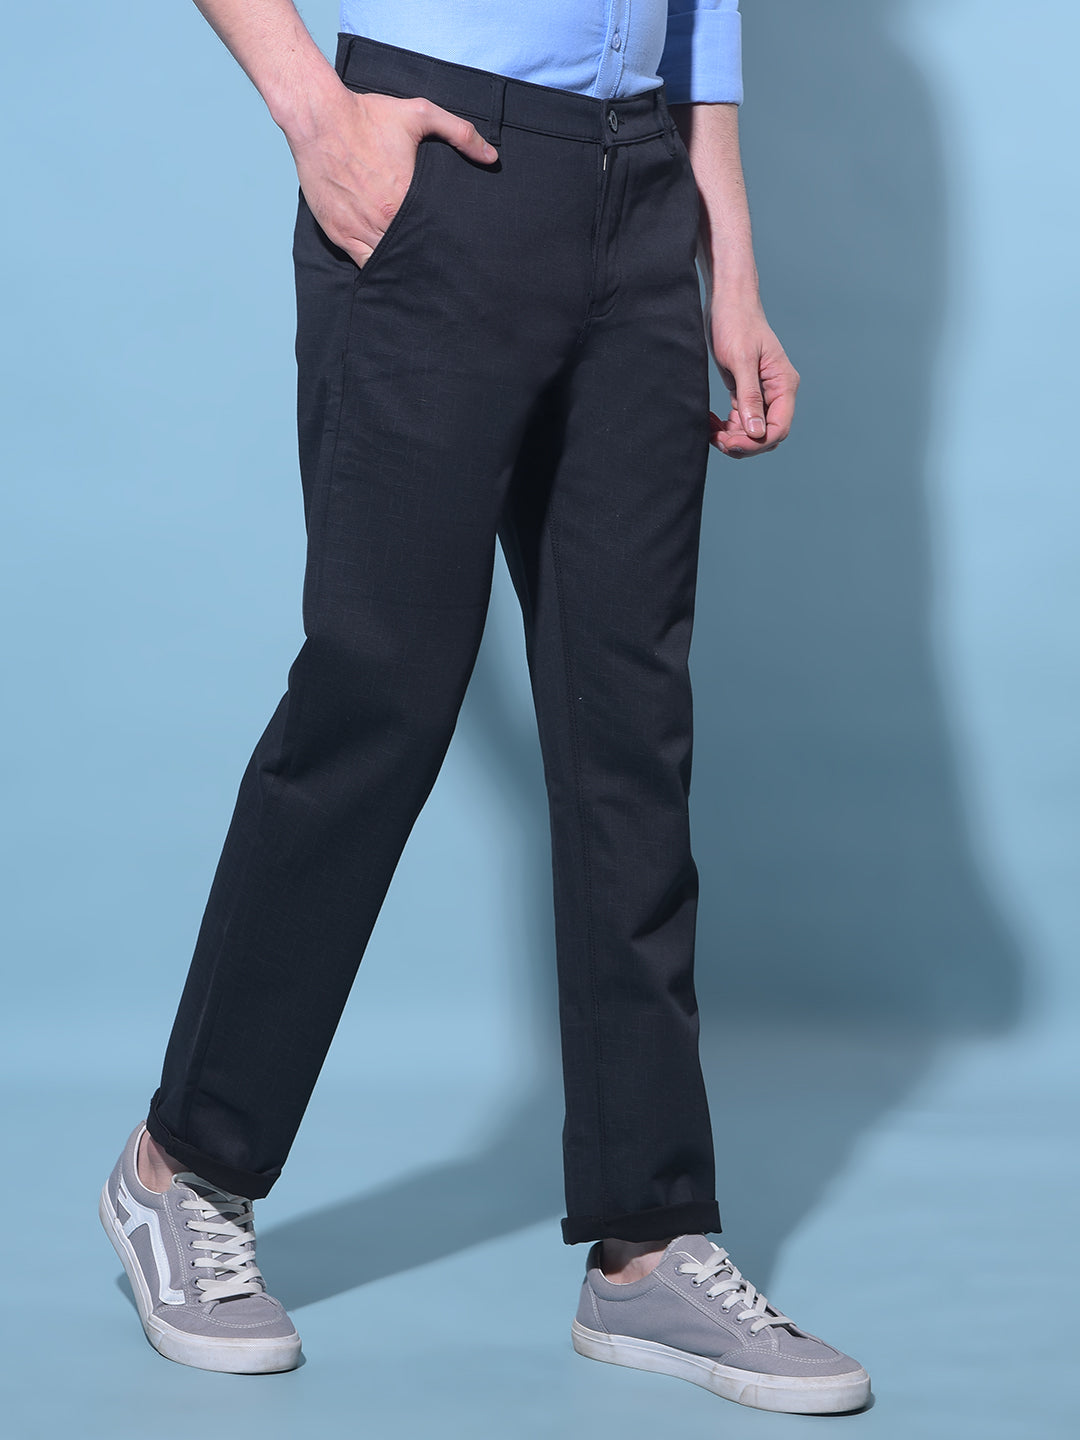 Black Straight Printed Chinos Trousers-Men Trousers-Crimsoune Club